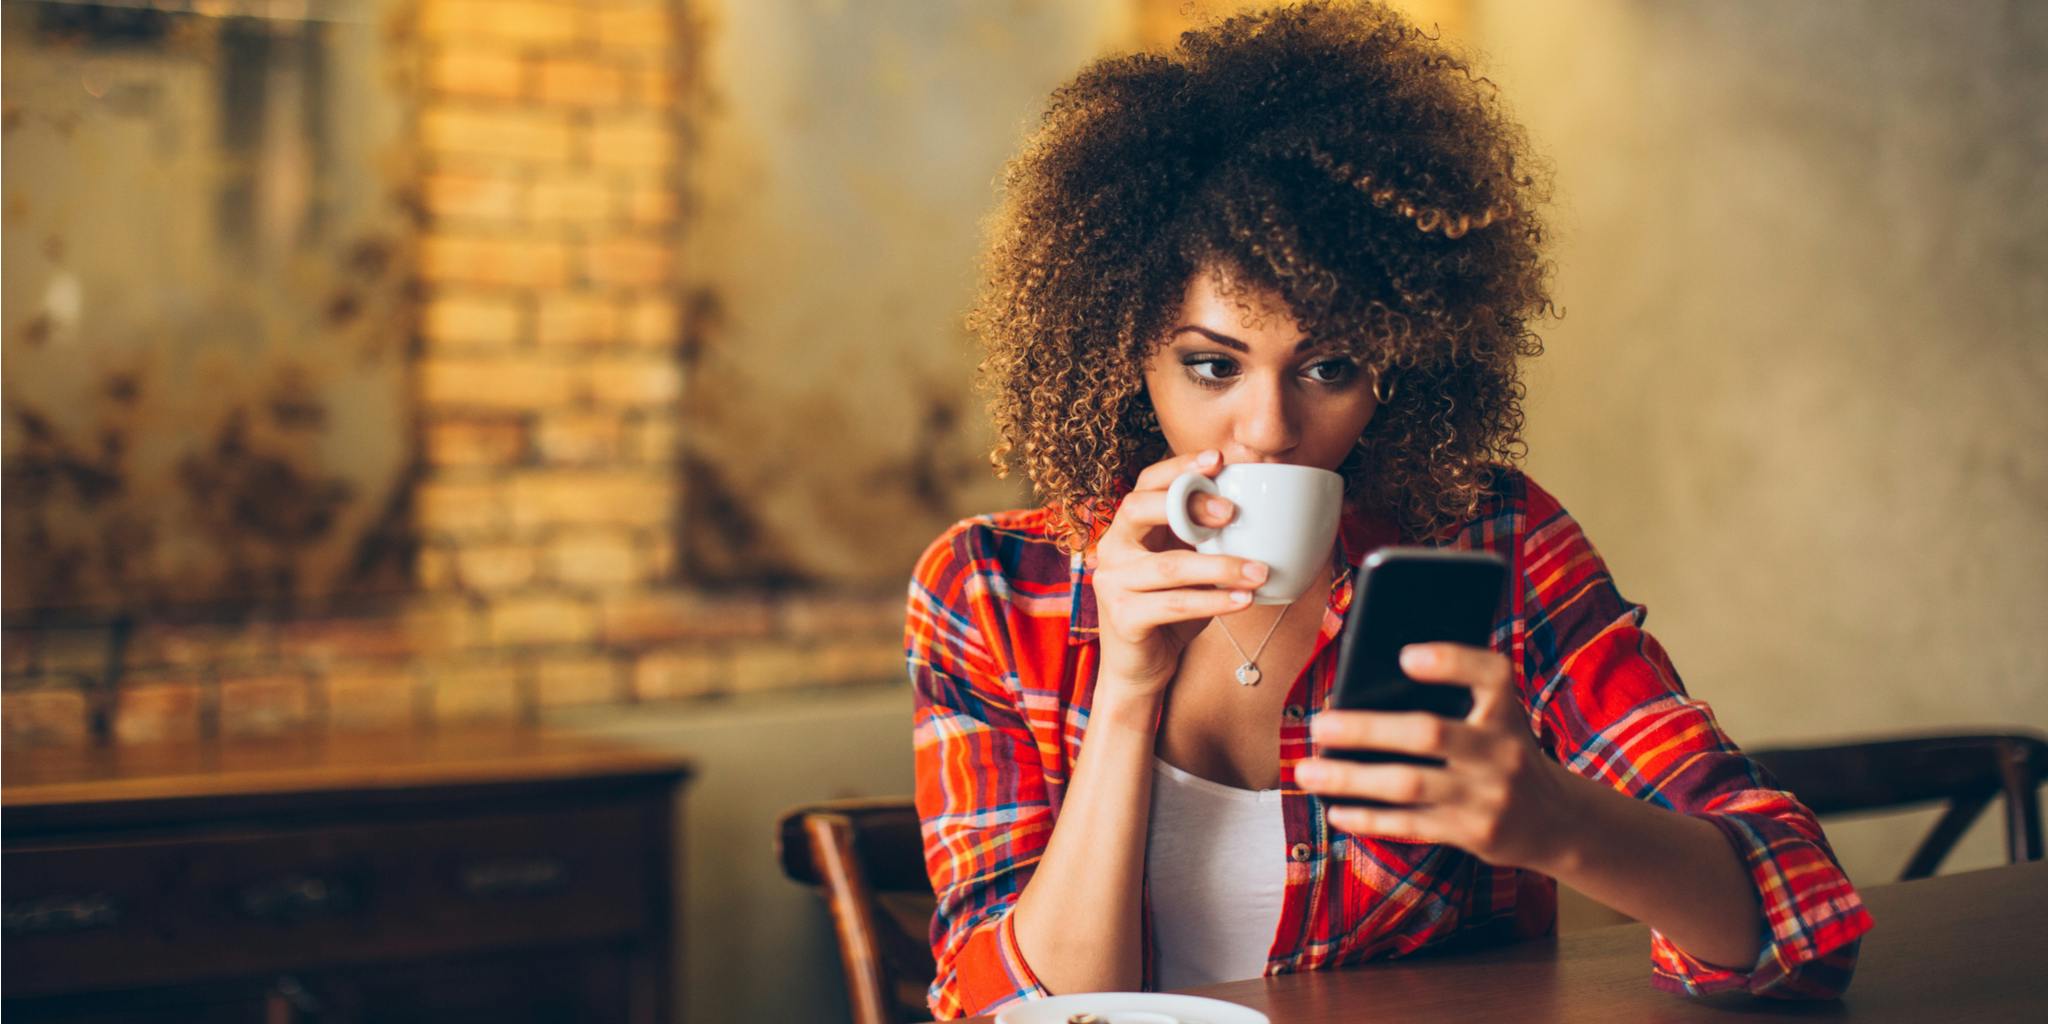 Lady drinking coffee and using smartphone